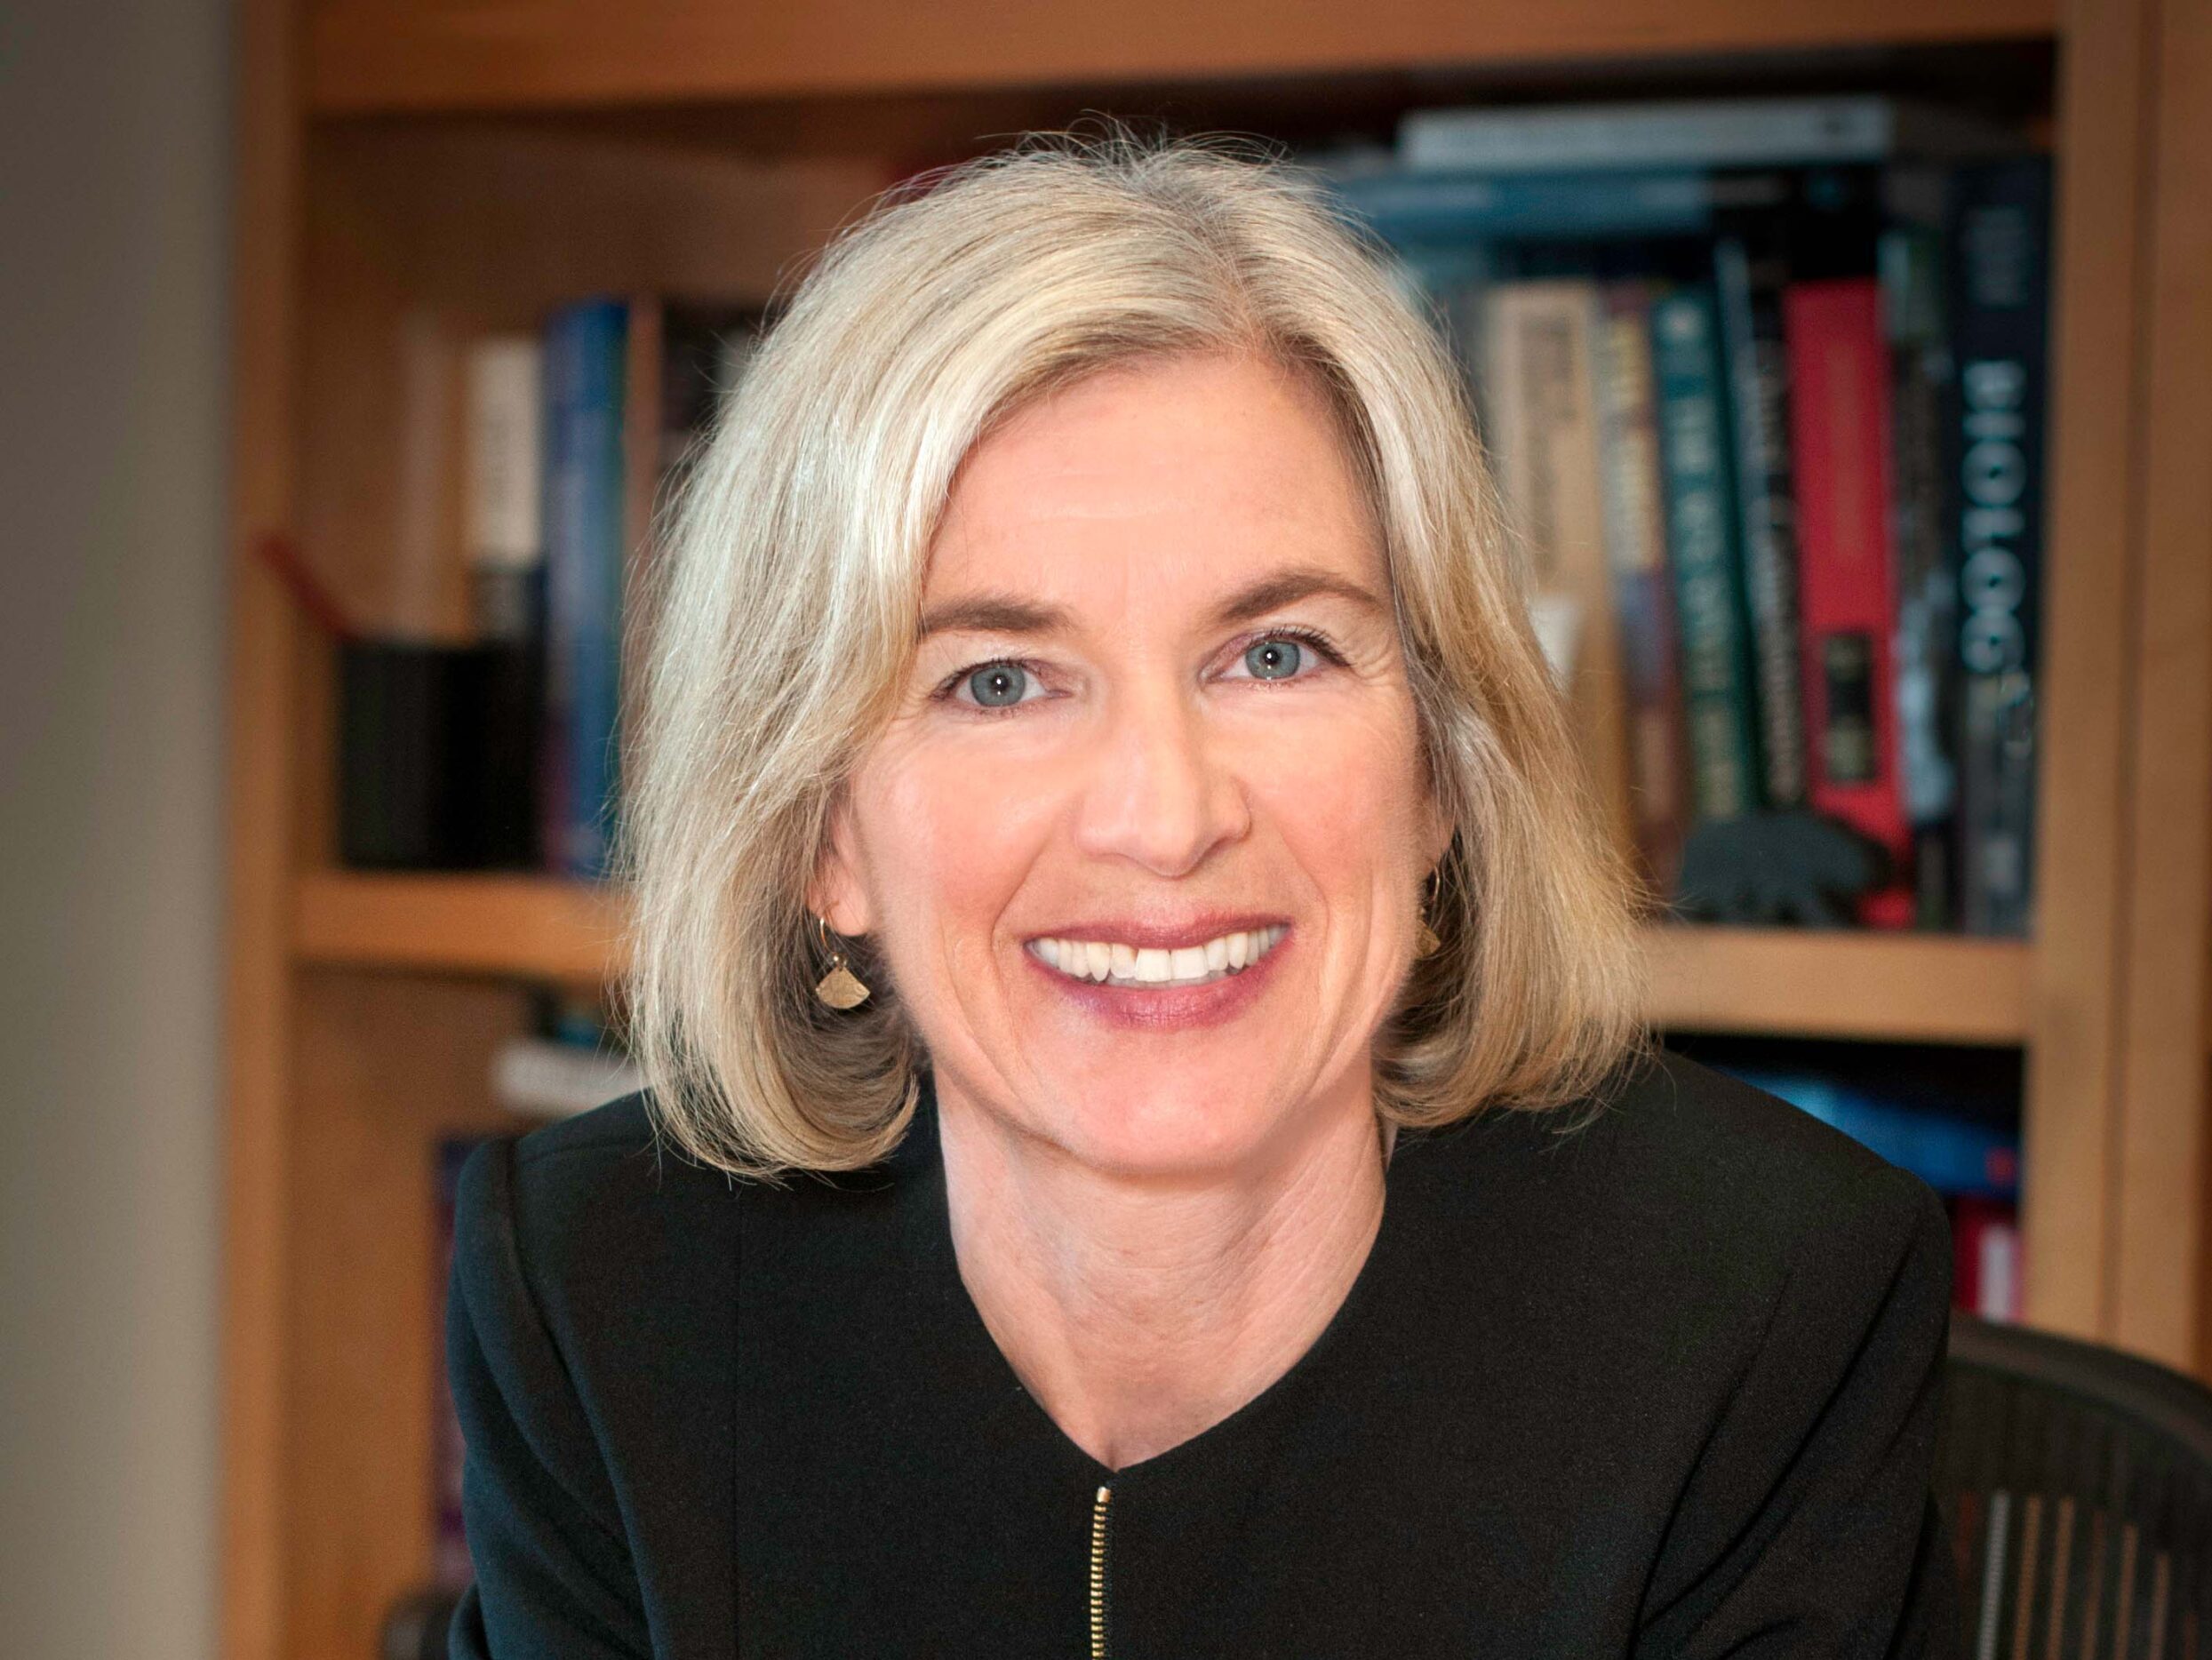 Jennifer Doudna, a light-haired person wearing a black jacket, smiles in front of a bookcase.